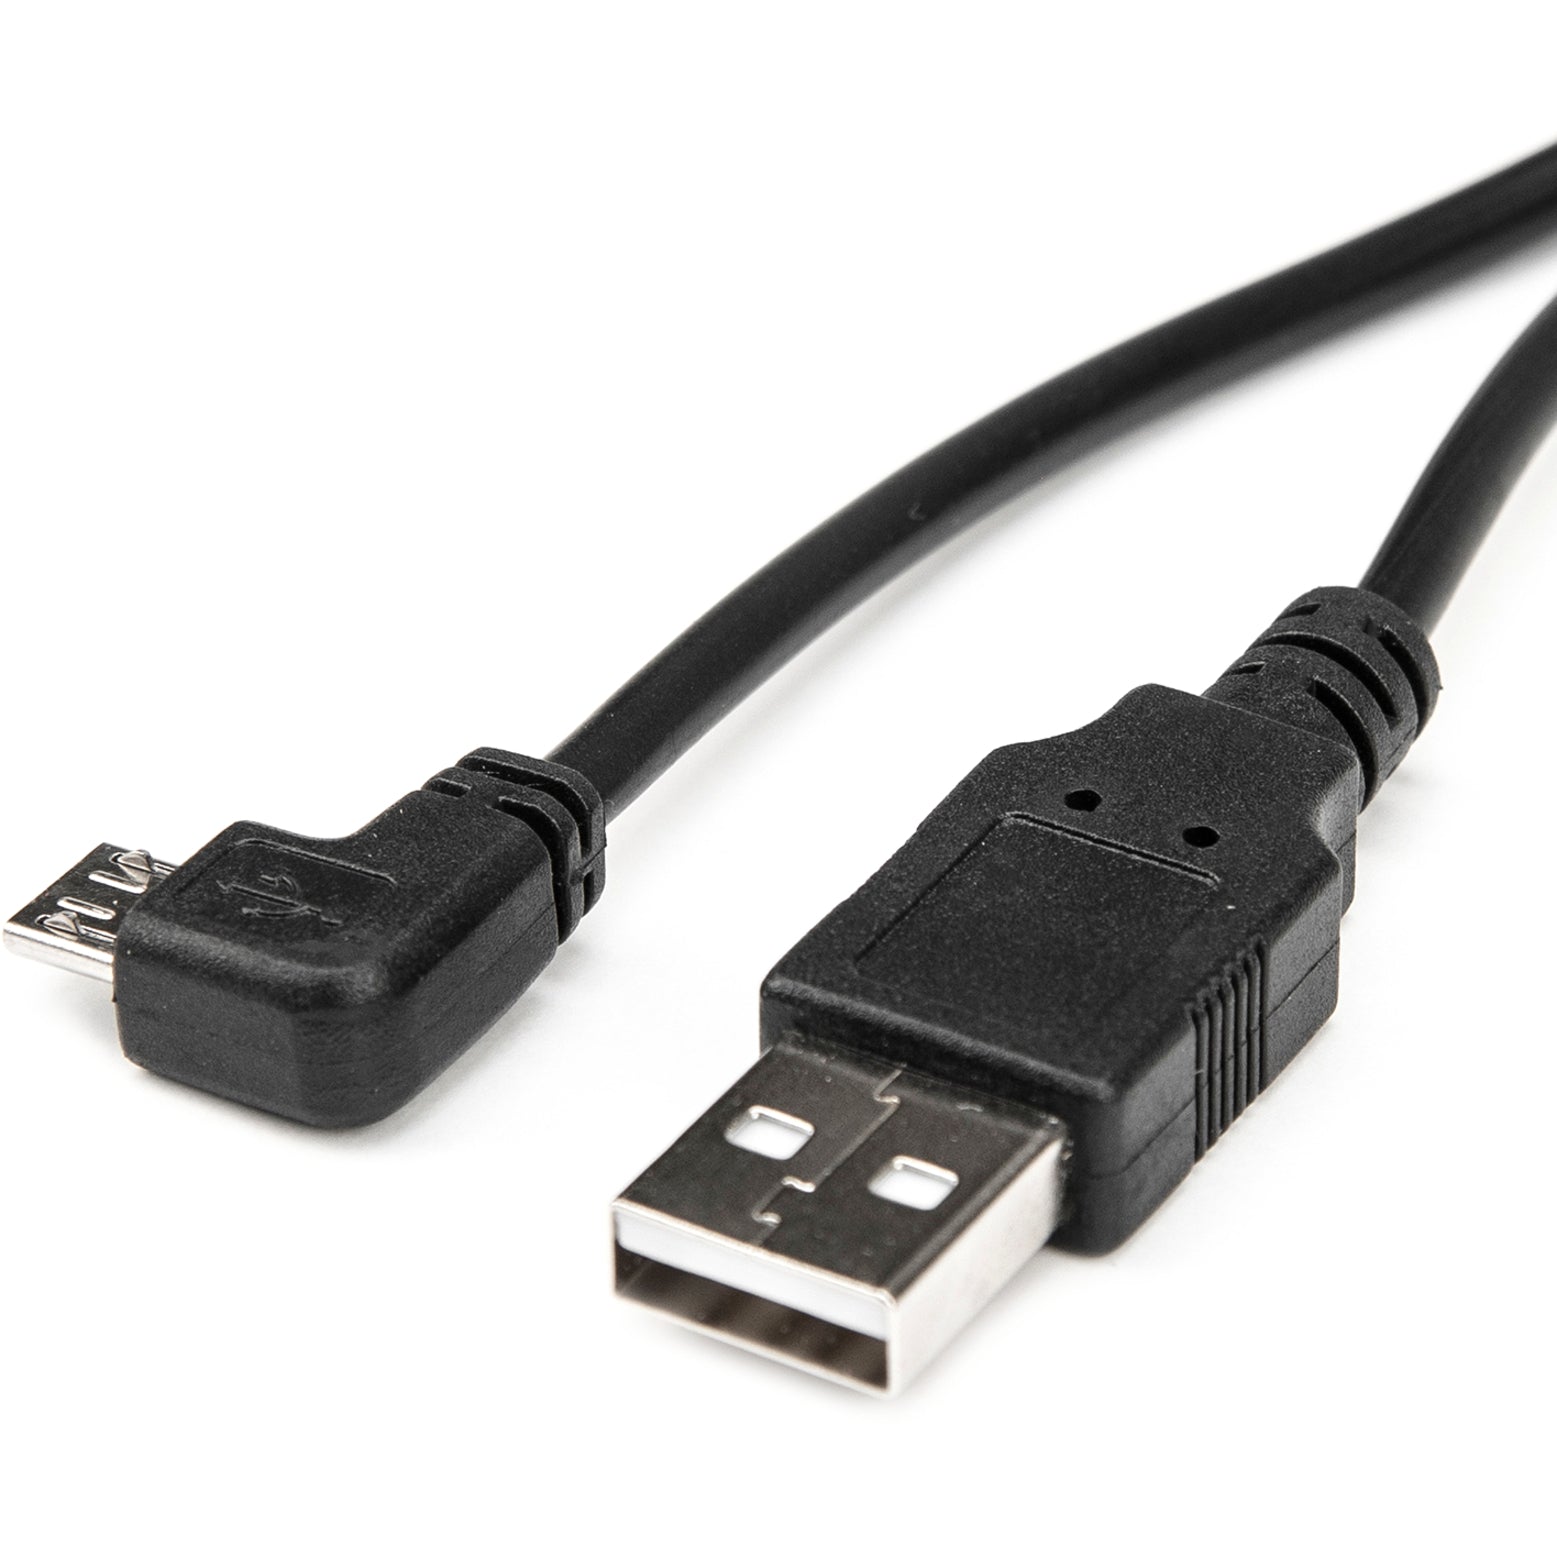 Rocstor Y10C222-B1 Premium USB Cable, 3ft, Right-angled Connector, Charging, Black